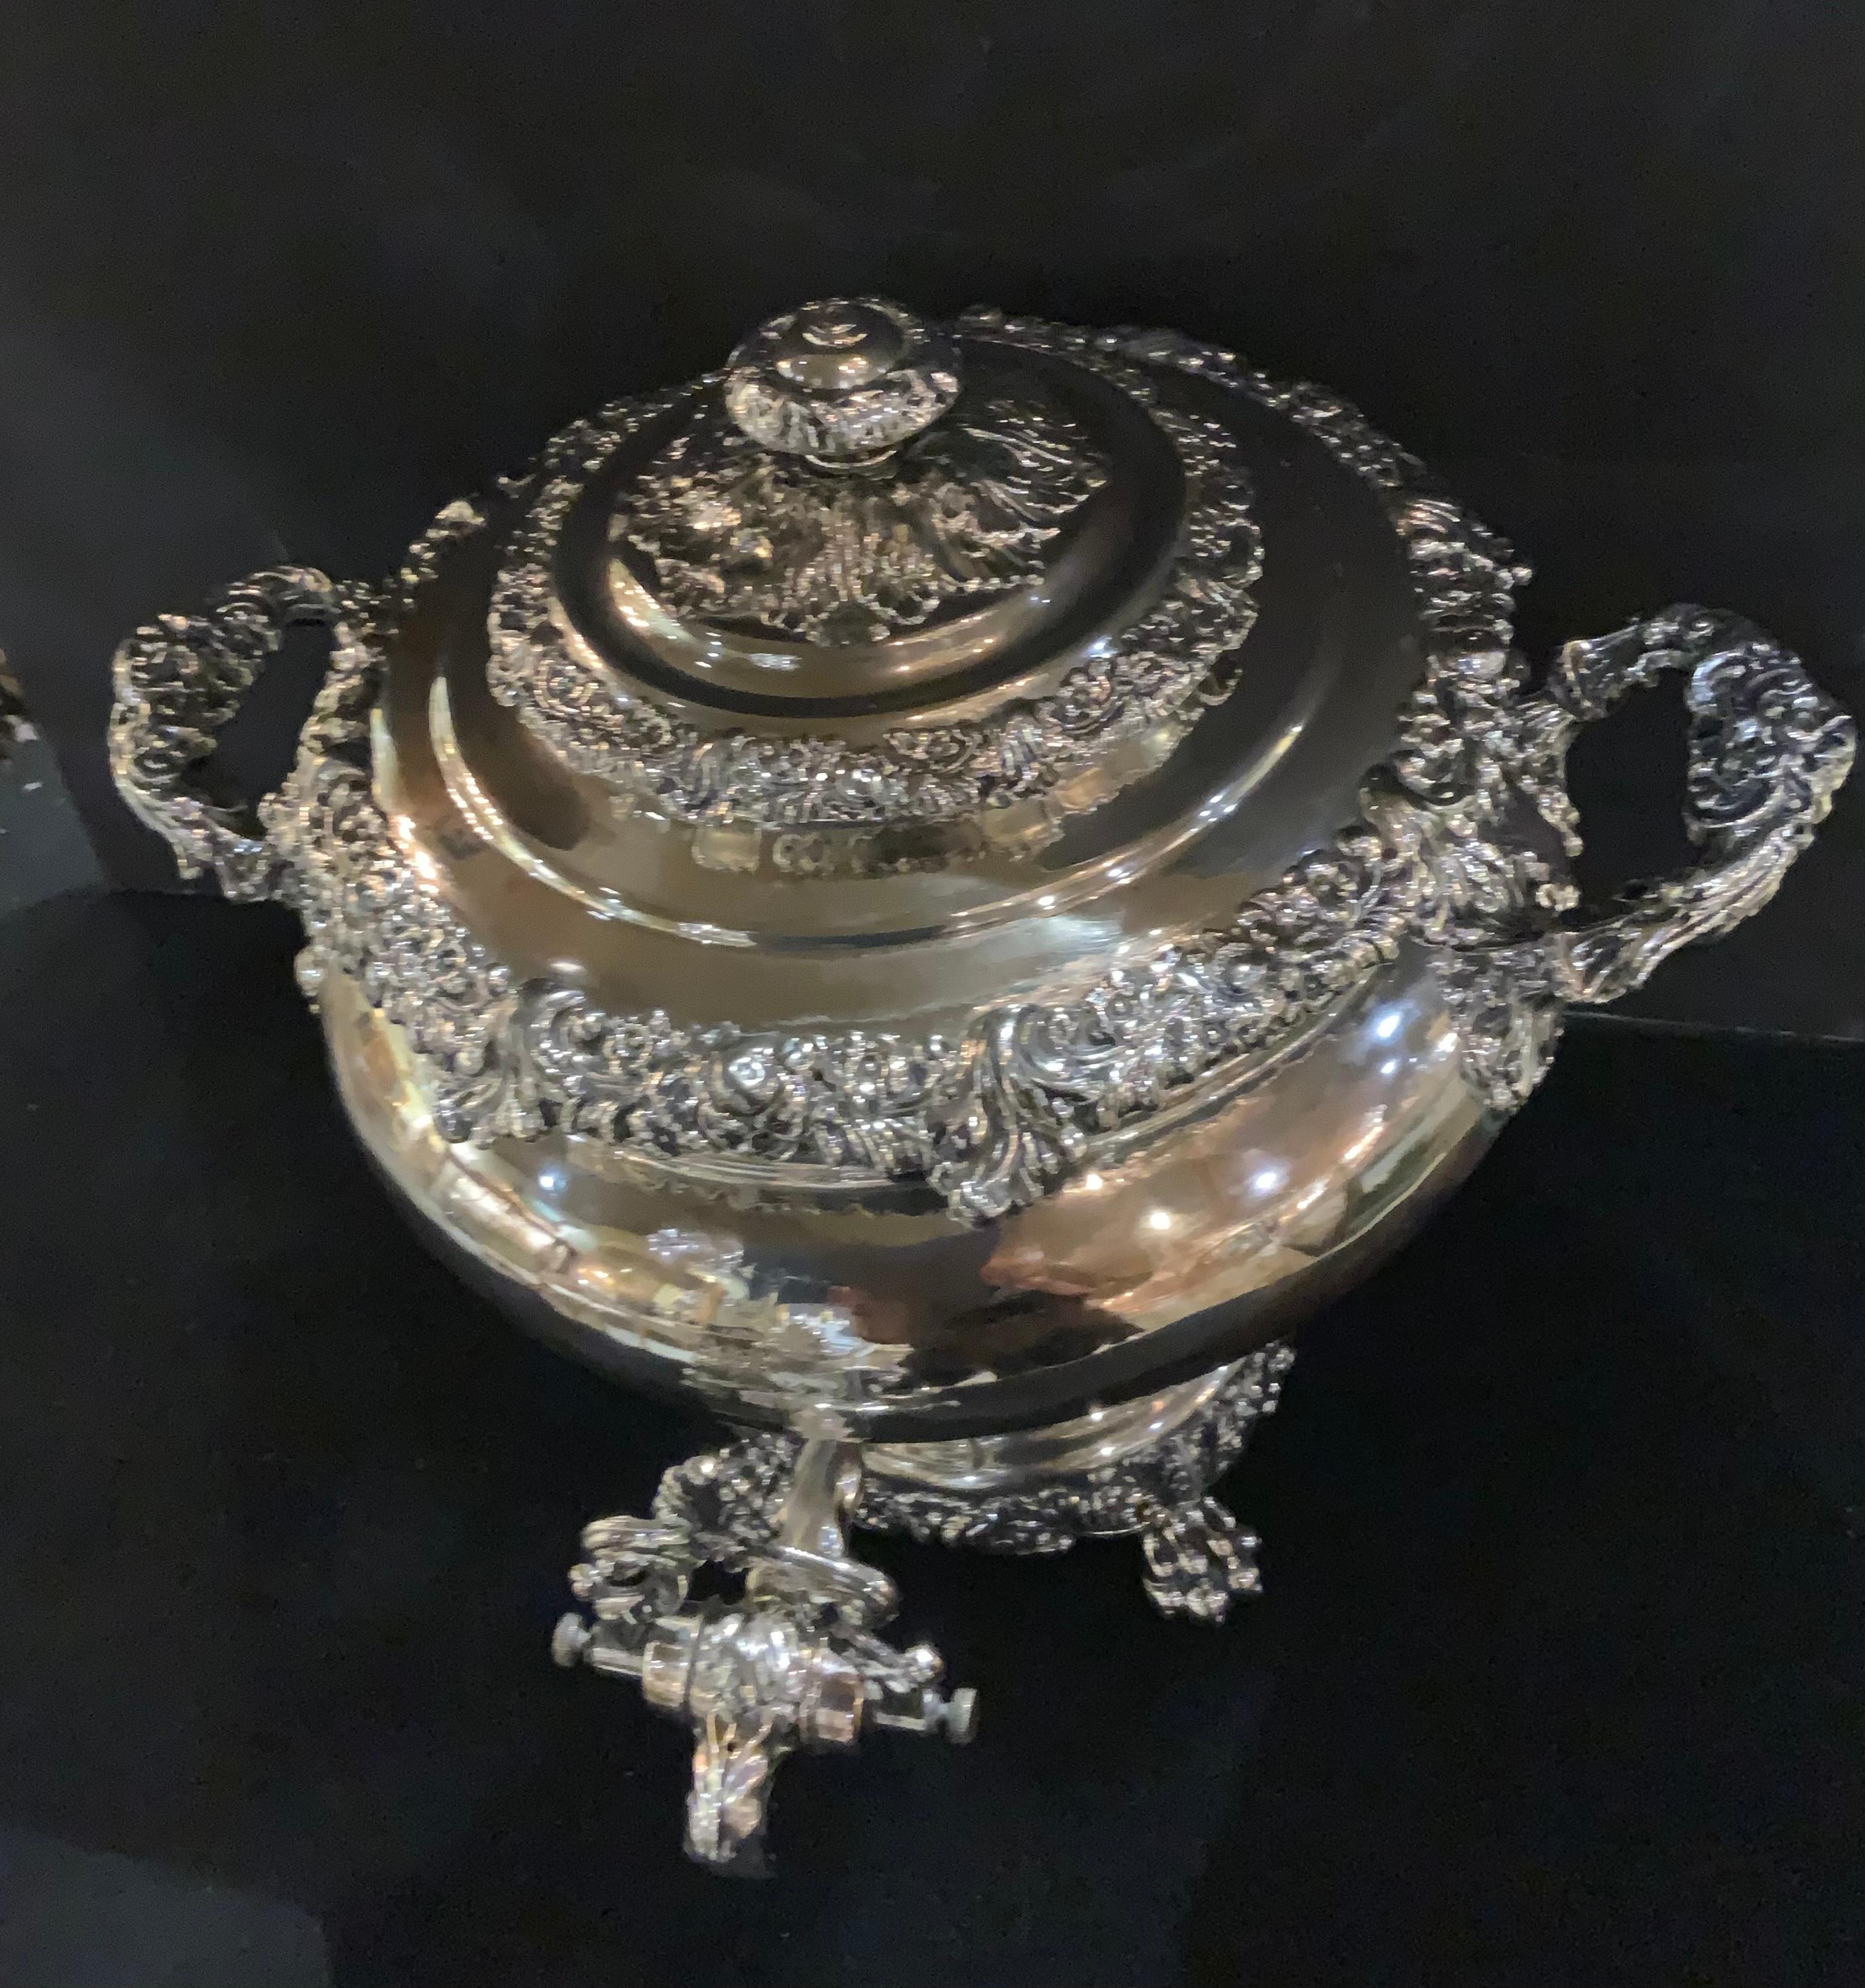 The excellent workmanship exhibited in this piece makes
It exceptional. A coat of arms is engraved on the front 
Which bears the arms of Pearce Impaling Haines. The silver
Work is impeccable and has not dents or scratches. It is
In fine working